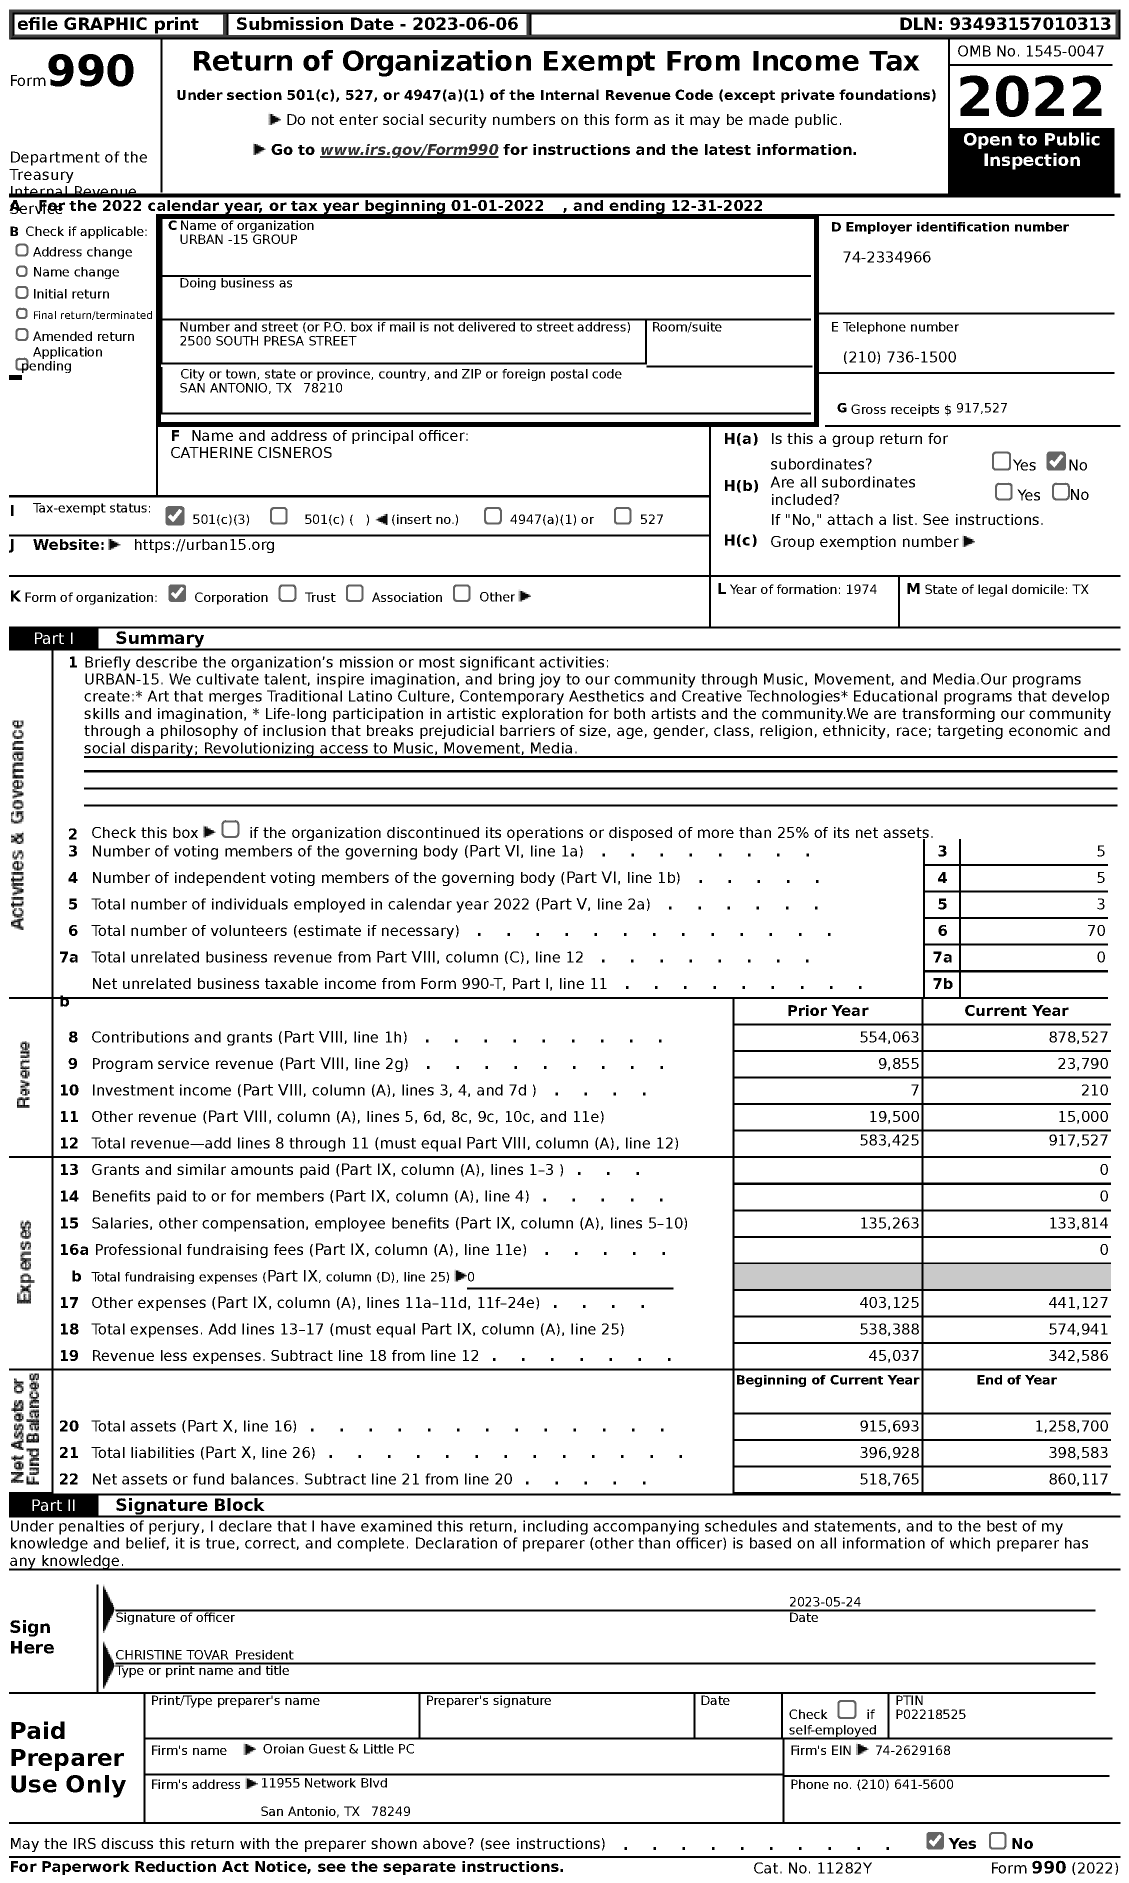 Image of first page of 2022 Form 990 for Urban -15 Group